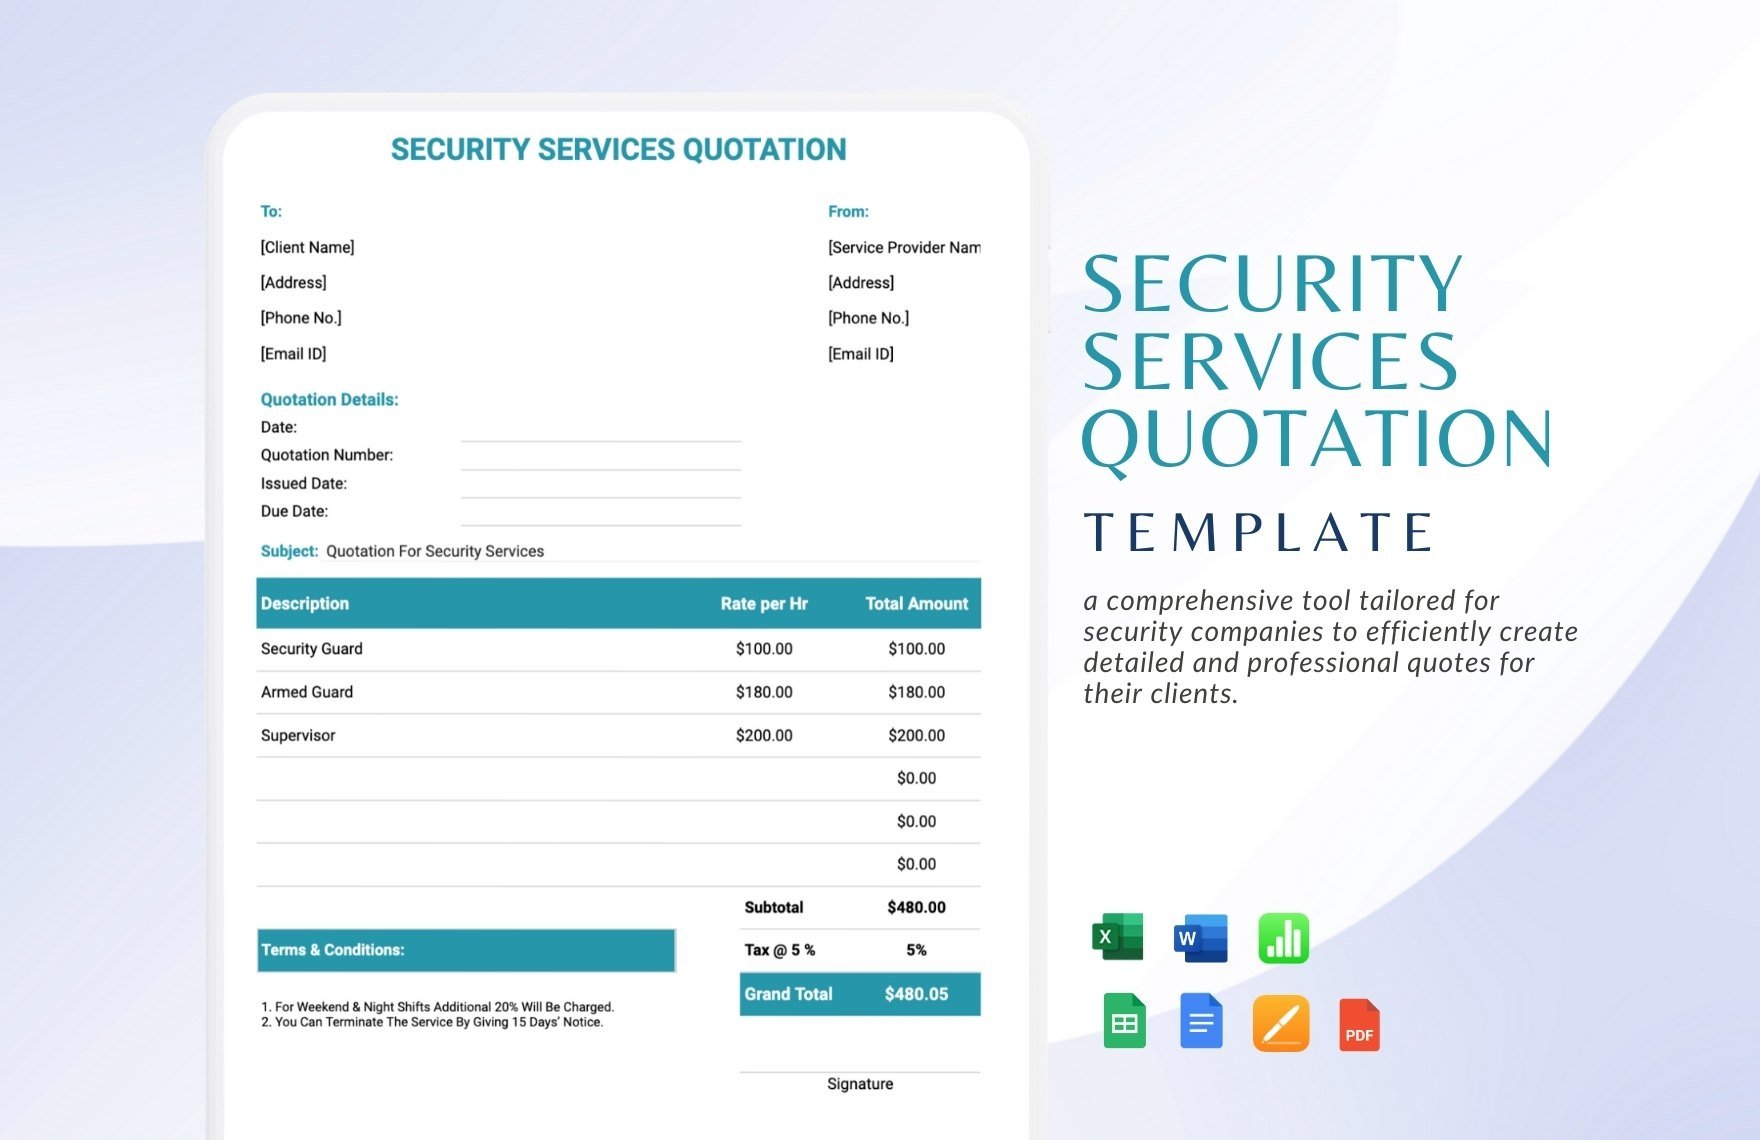 Security Services Quotation Template in Word, Google Docs, Excel, PDF, Google Sheets, Apple Pages, Apple Numbers